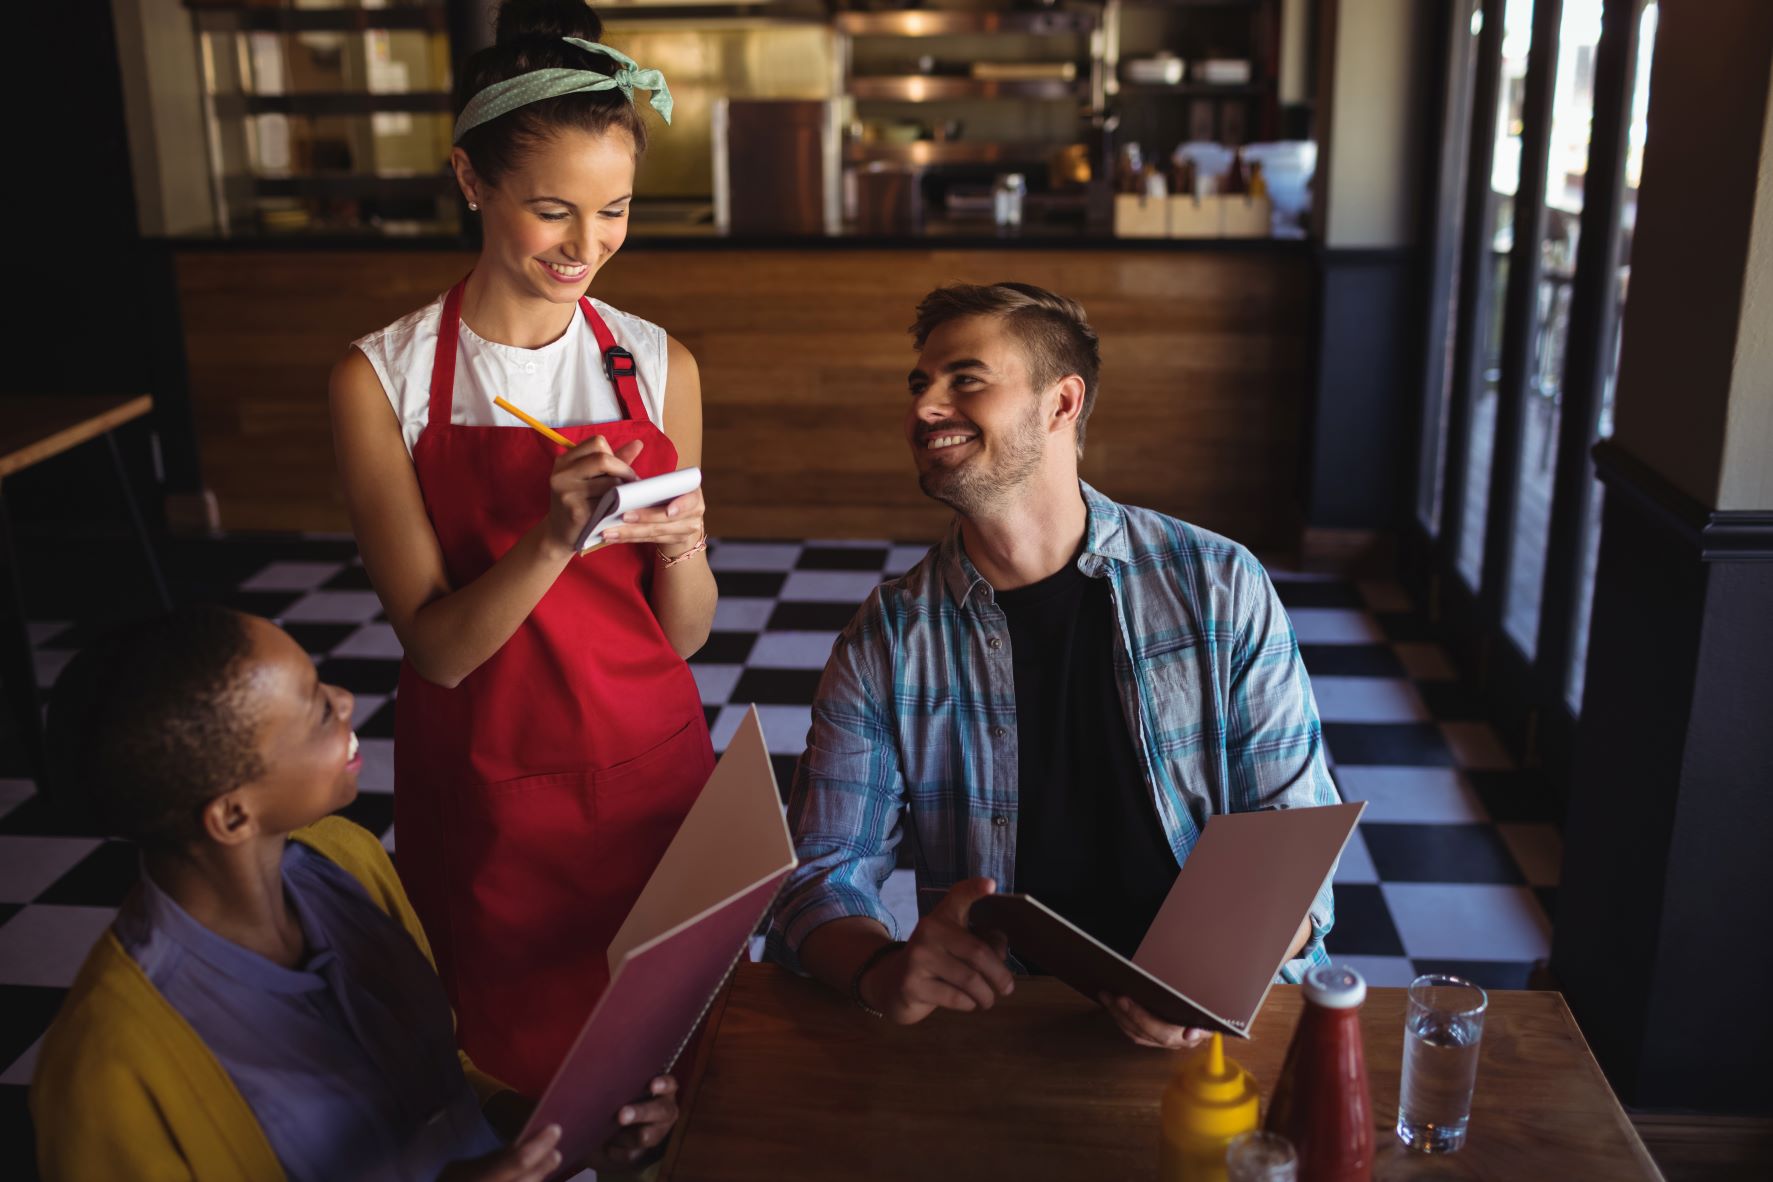 How to Make Your Restaurant An Interactive Experience